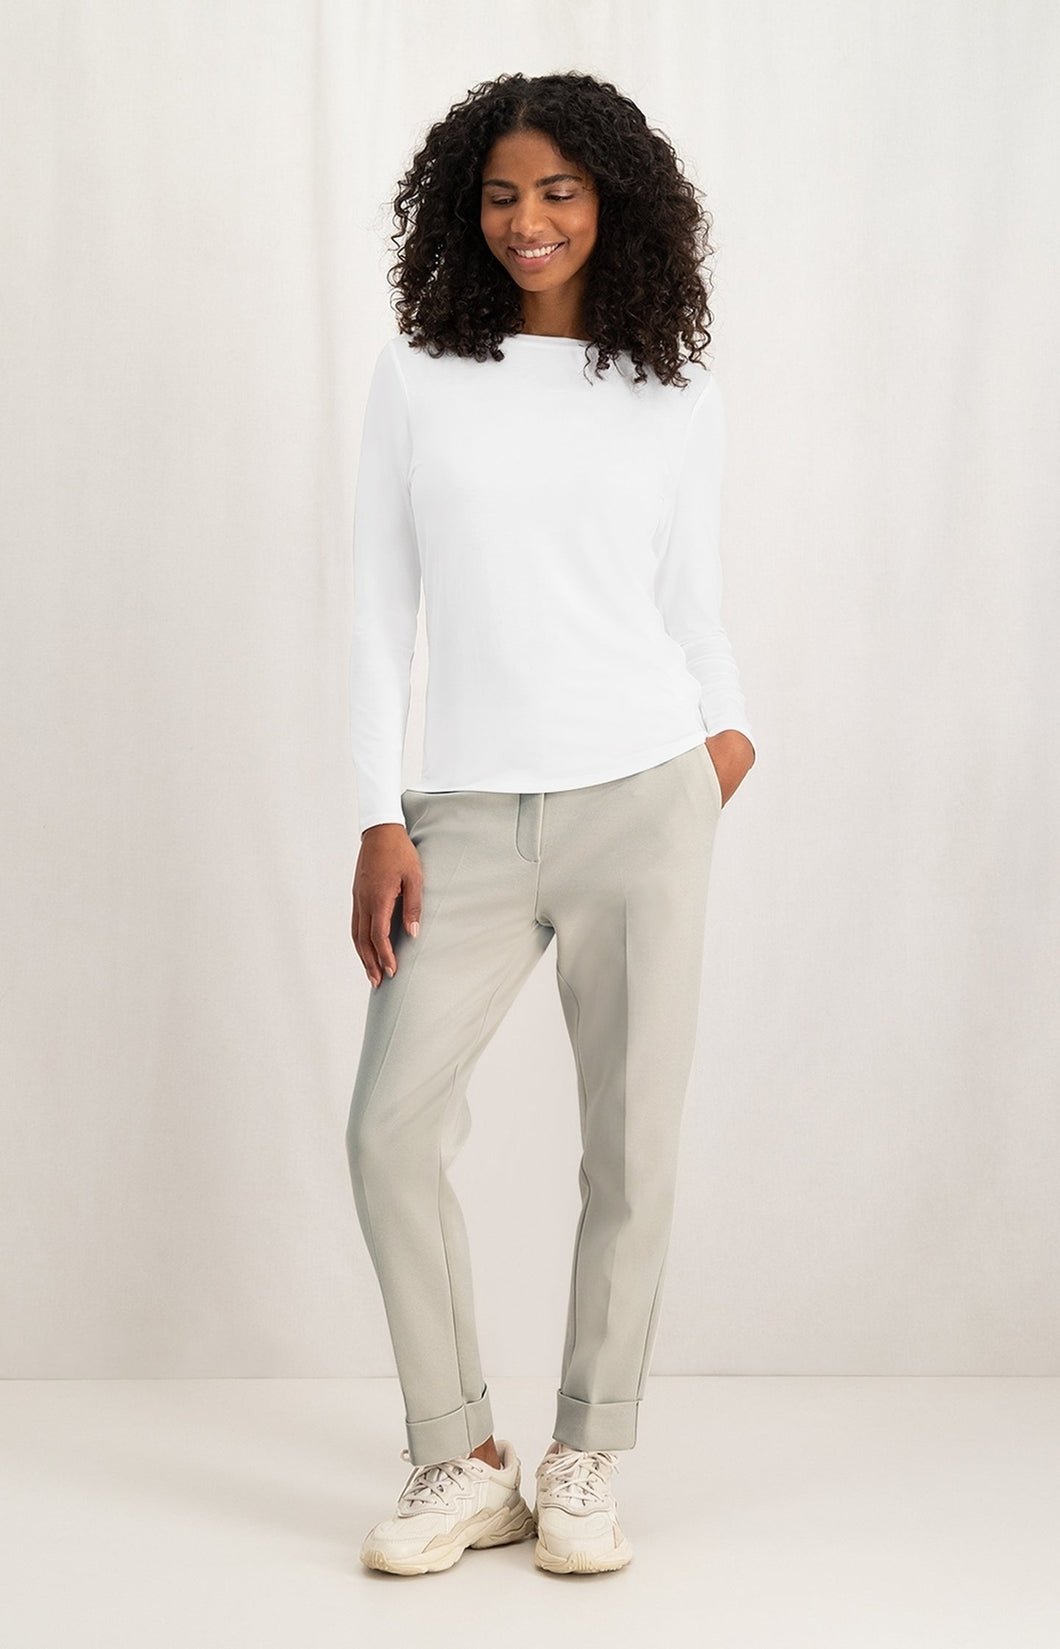 Scuba trousers with straight leg, pockets and elastic waist - Silver Lining Beige - Type: closeup